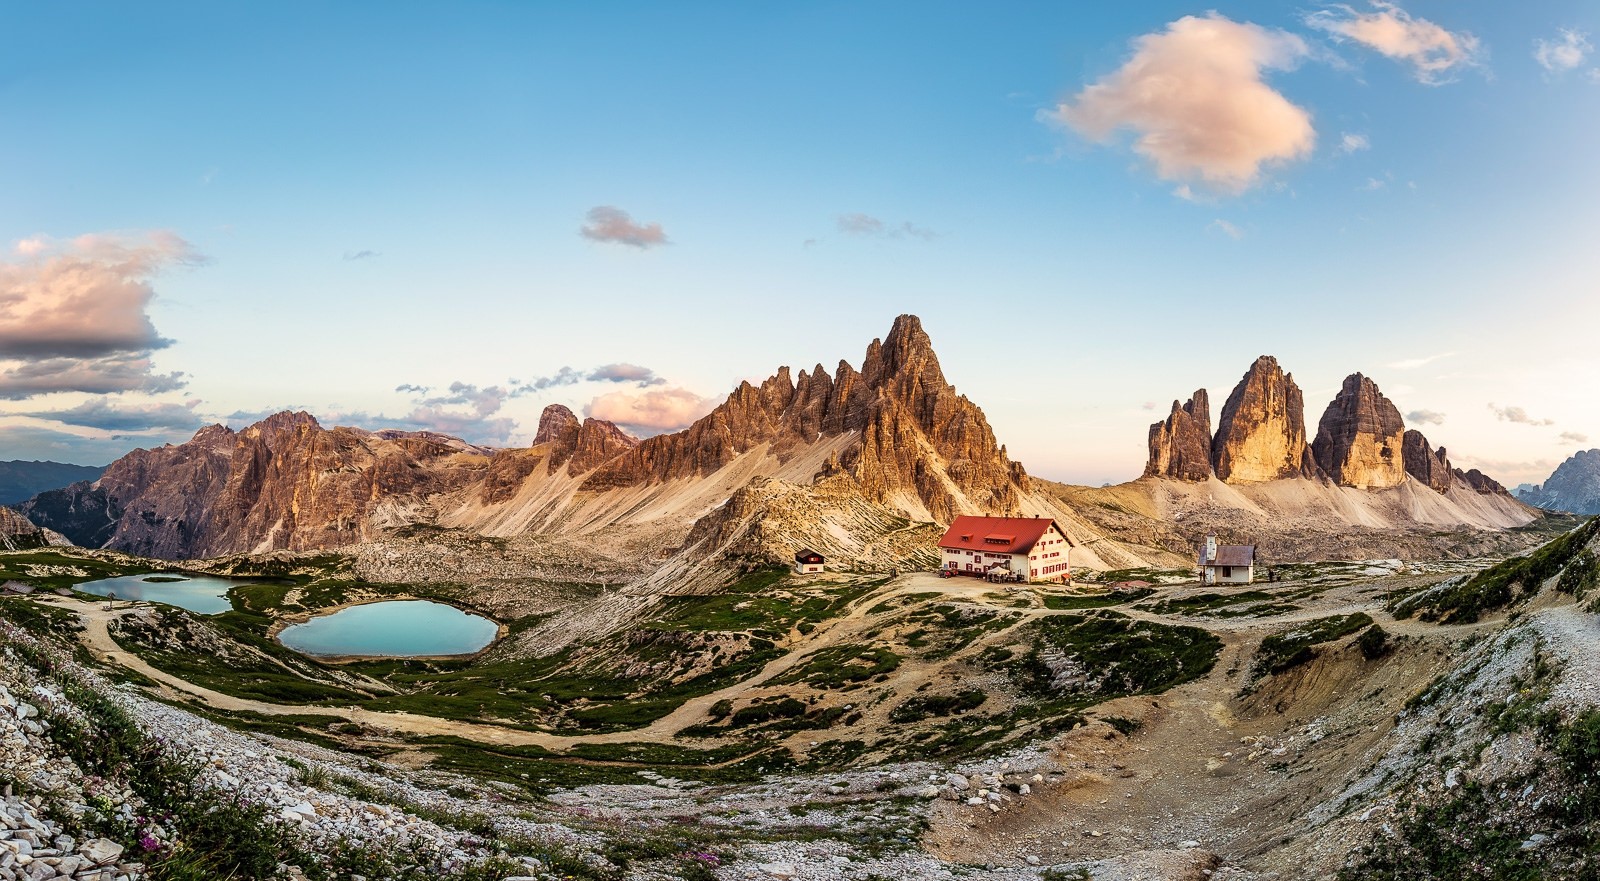 General 1600x881 photography landscape nature mountains lake summer sunset cabin Dolomites Italy